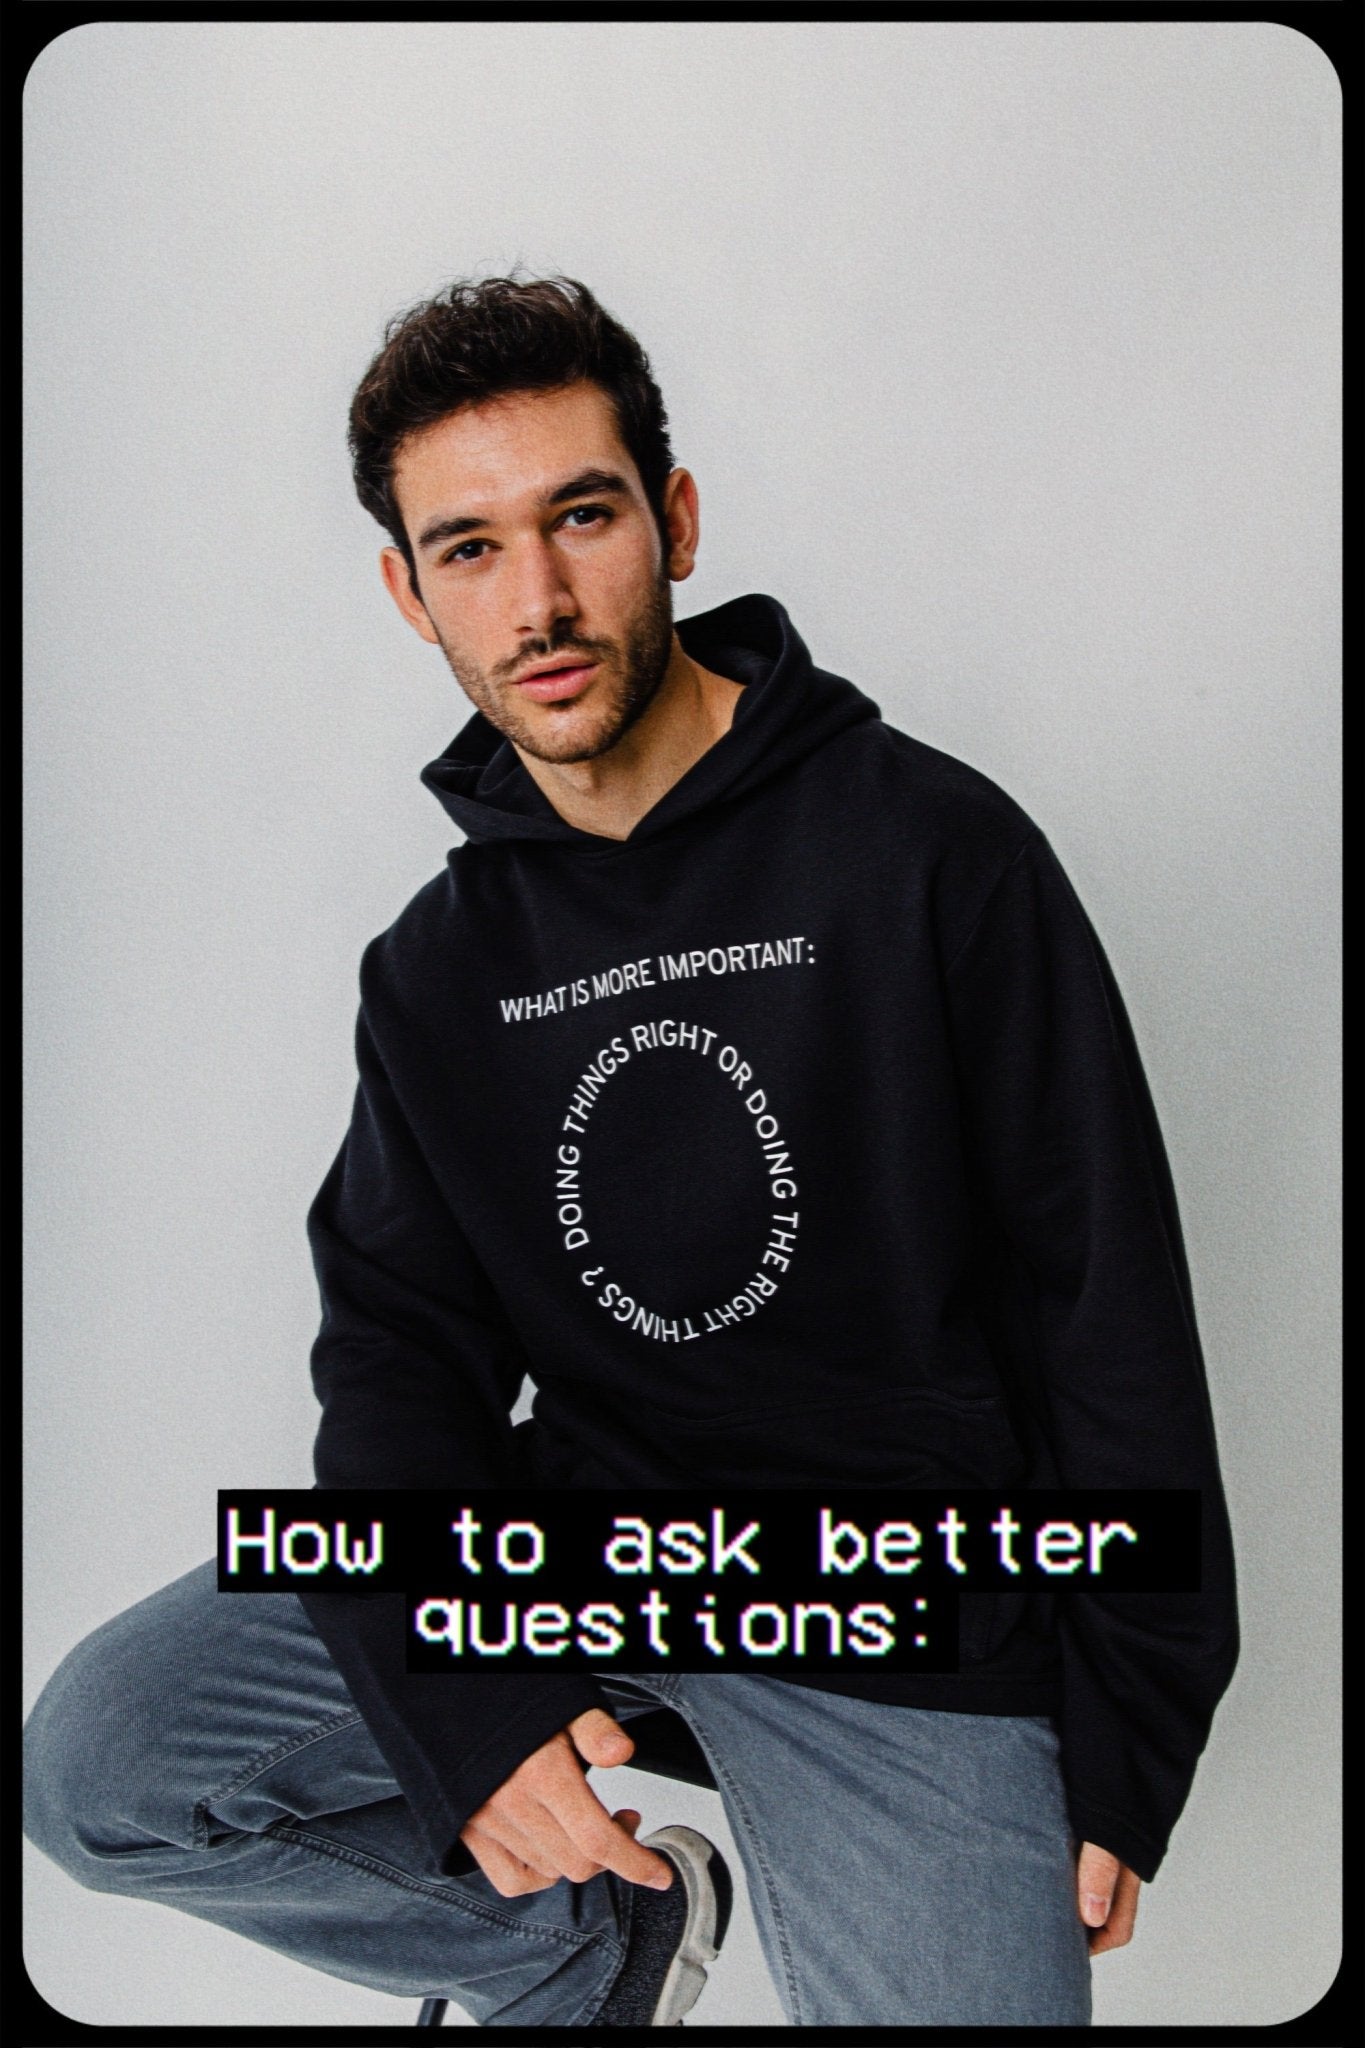 How to ask better questions? - OBLIVIOUS?